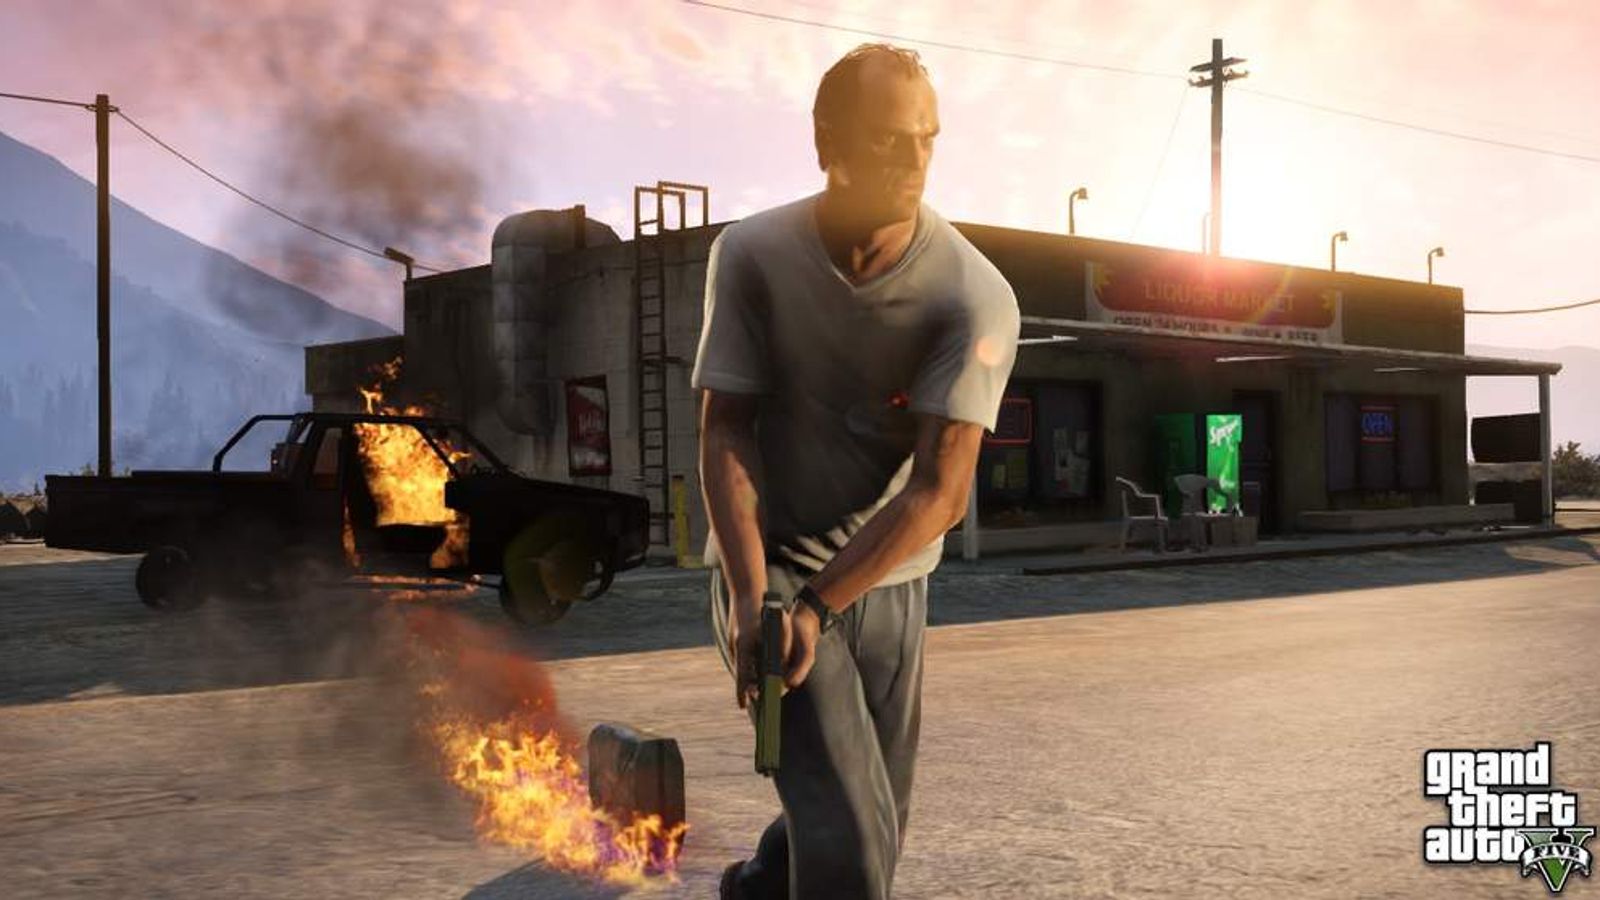 GTA 5 wins Game of the Year at the 2013 Golden Joysticks